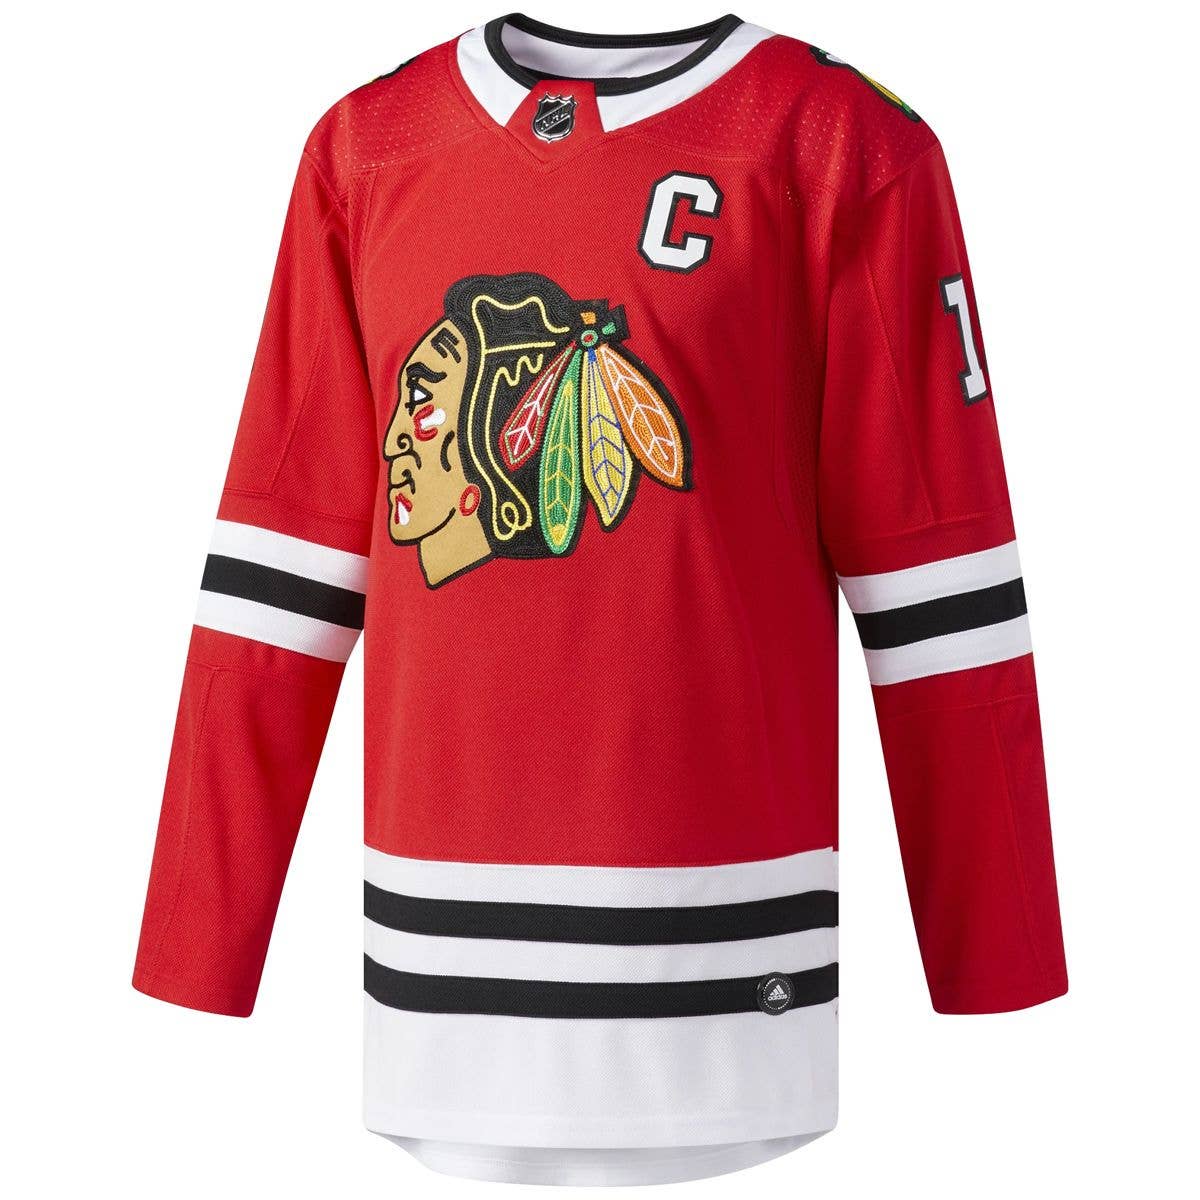 CERTIFIED GRAIL! A personal favorite Ultra Rare Authentic Chicago Blackhawks  3rd Jersey from 08-09…never thought I'd find one (let alone NWT) but it's  here and its real! Out to the stitcher on